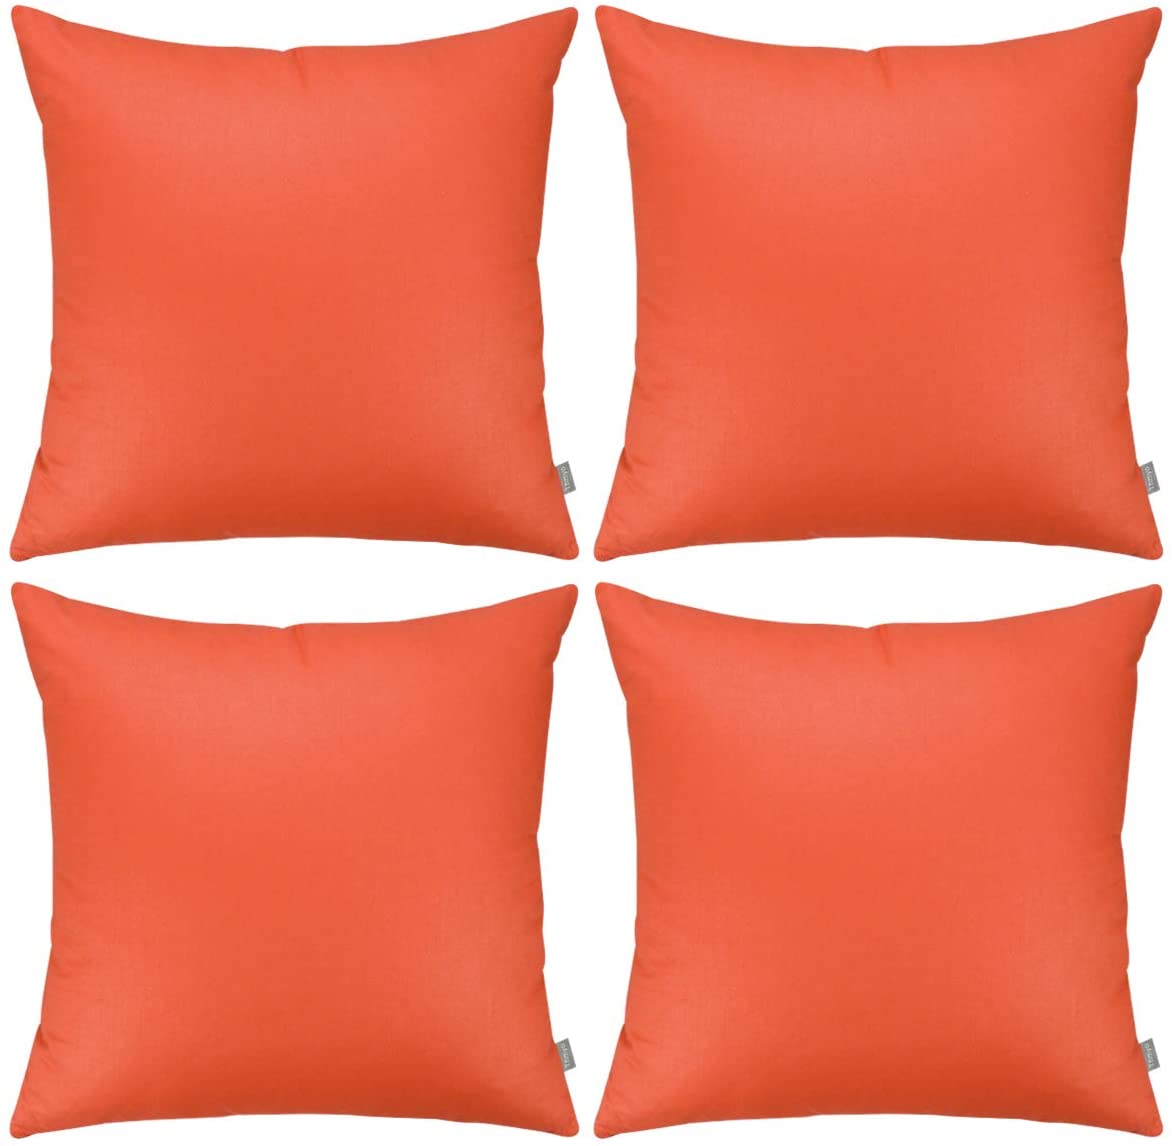 20x20inch/50x50cm, Red Cover Only,No Insert 4-Pack Cotton Comfortable Solid Decorative Throw Pillow Case Square Cushion Cover Pillowcase